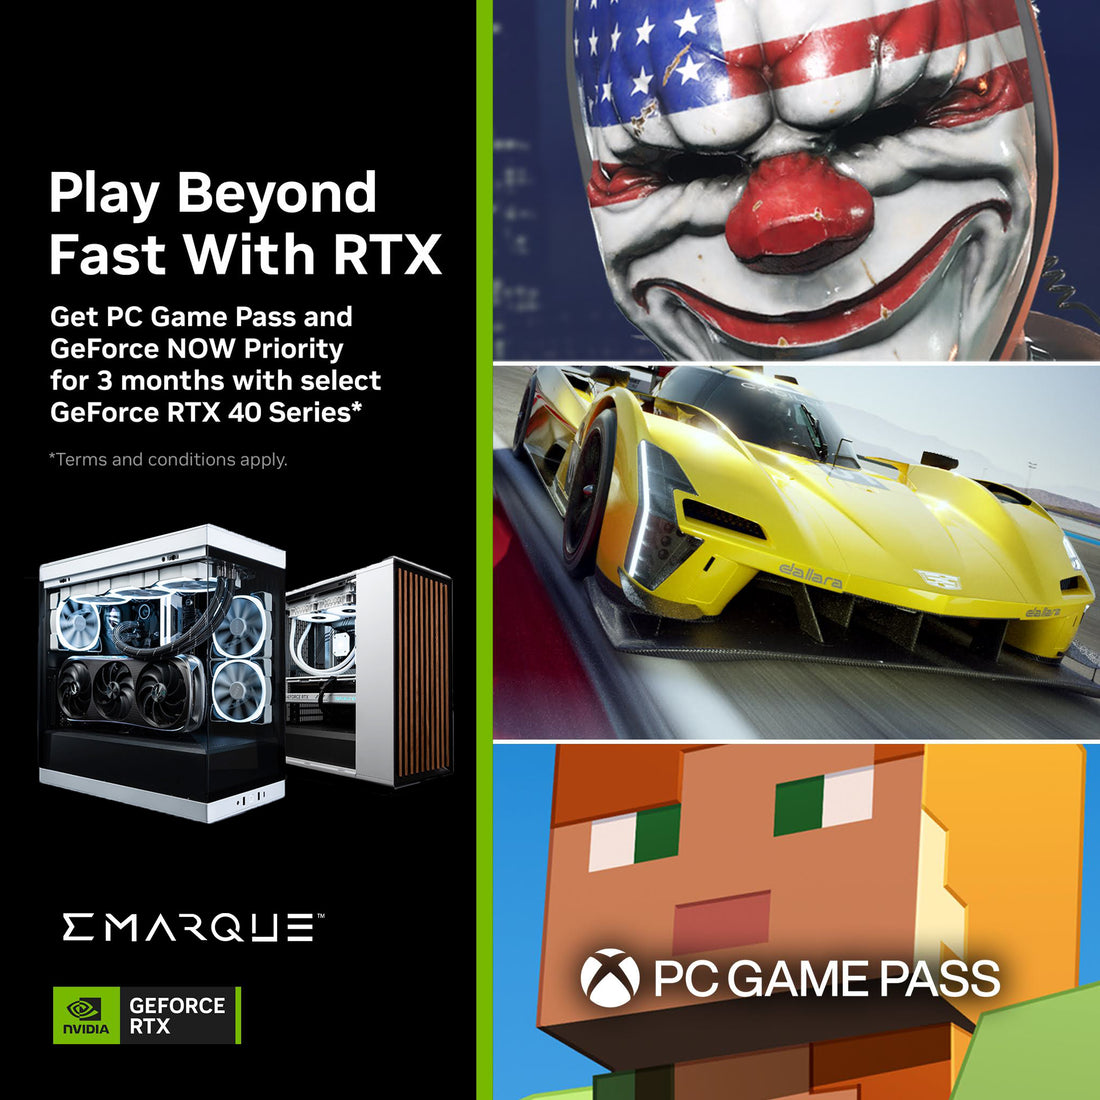 Get PC Game Pass for 3 months with select GeForce RTX 40 Series* - EMARQUE